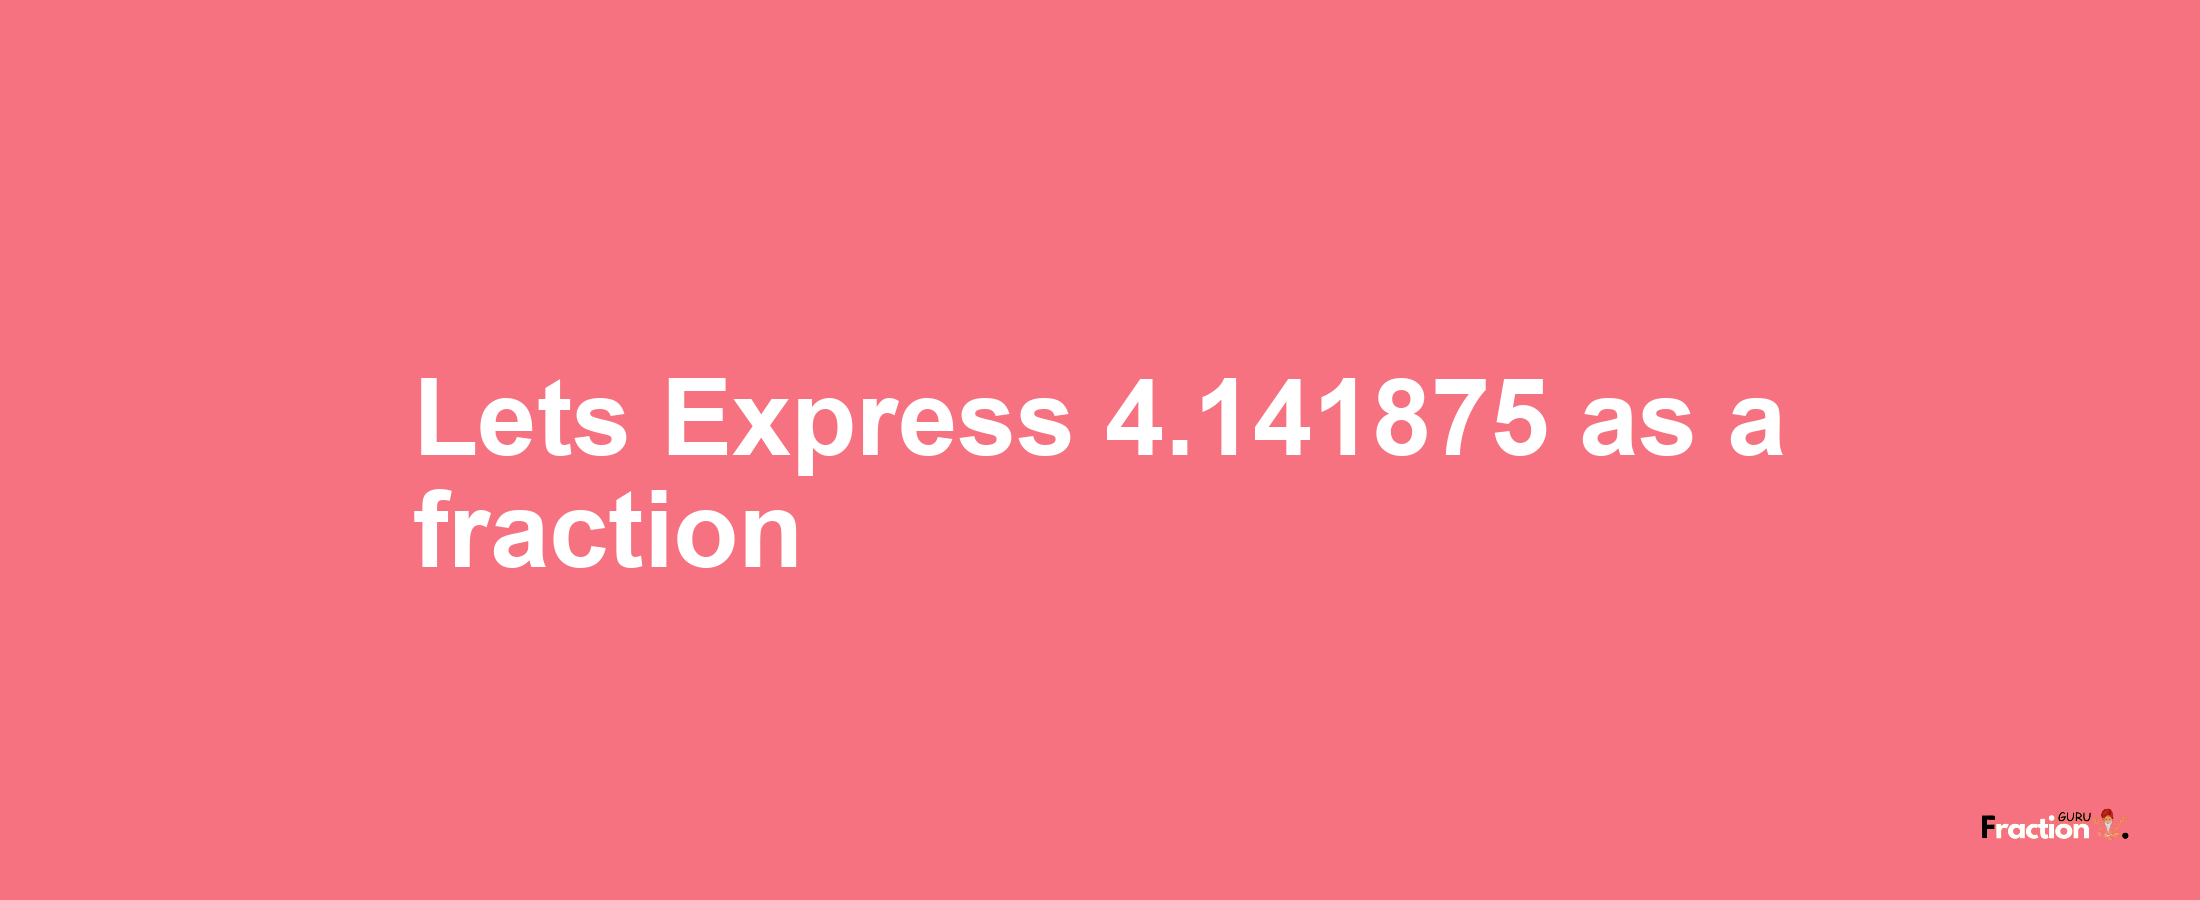 Lets Express 4.141875 as afraction